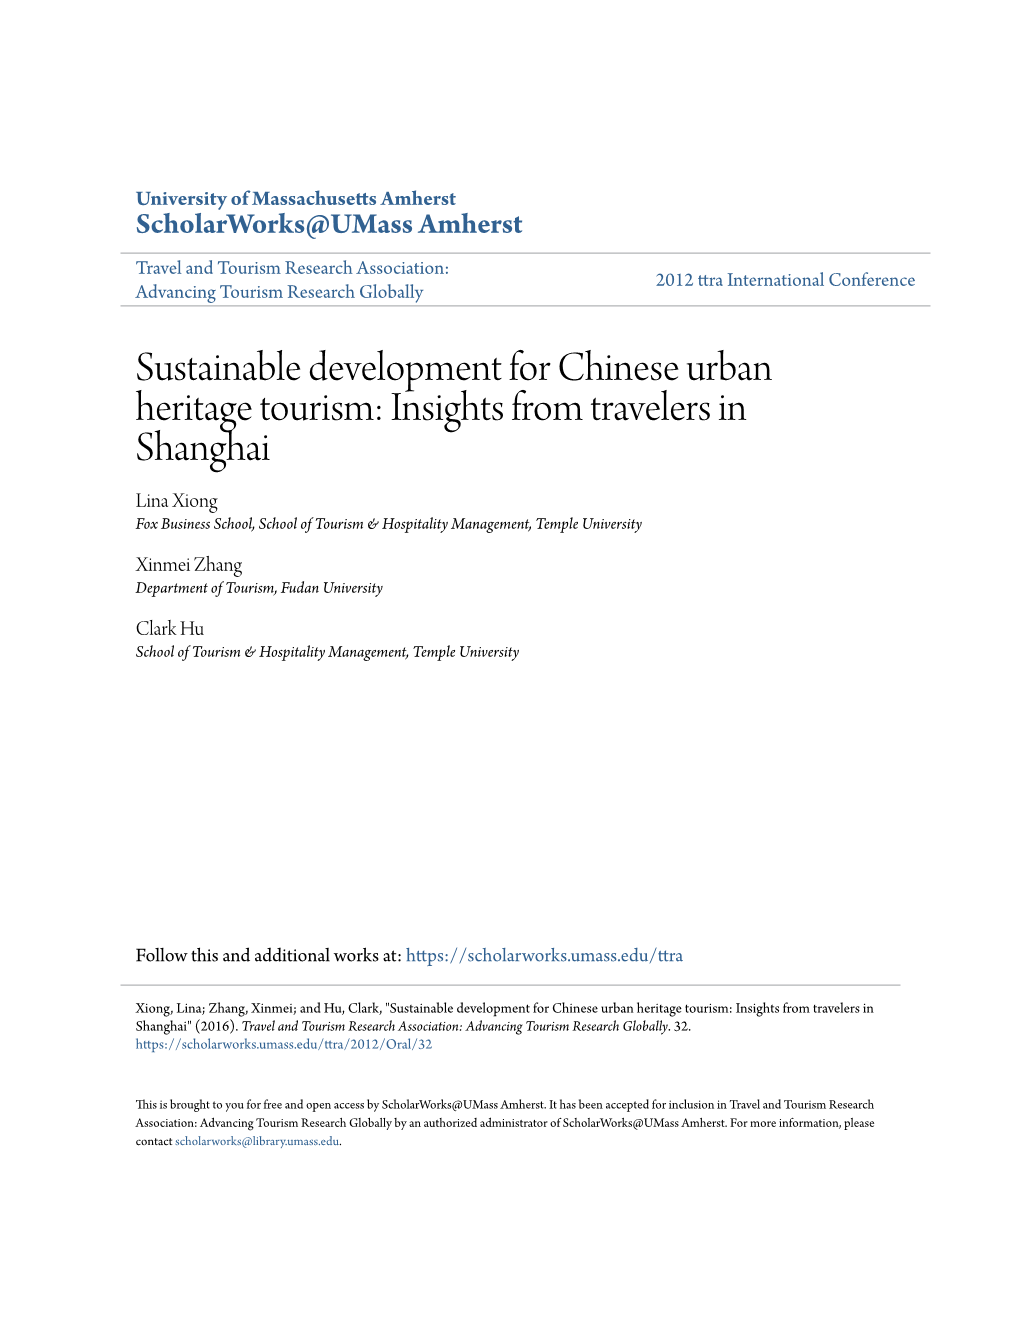 Sustainable Development for Chinese Urban Heritage Tourism: Insights